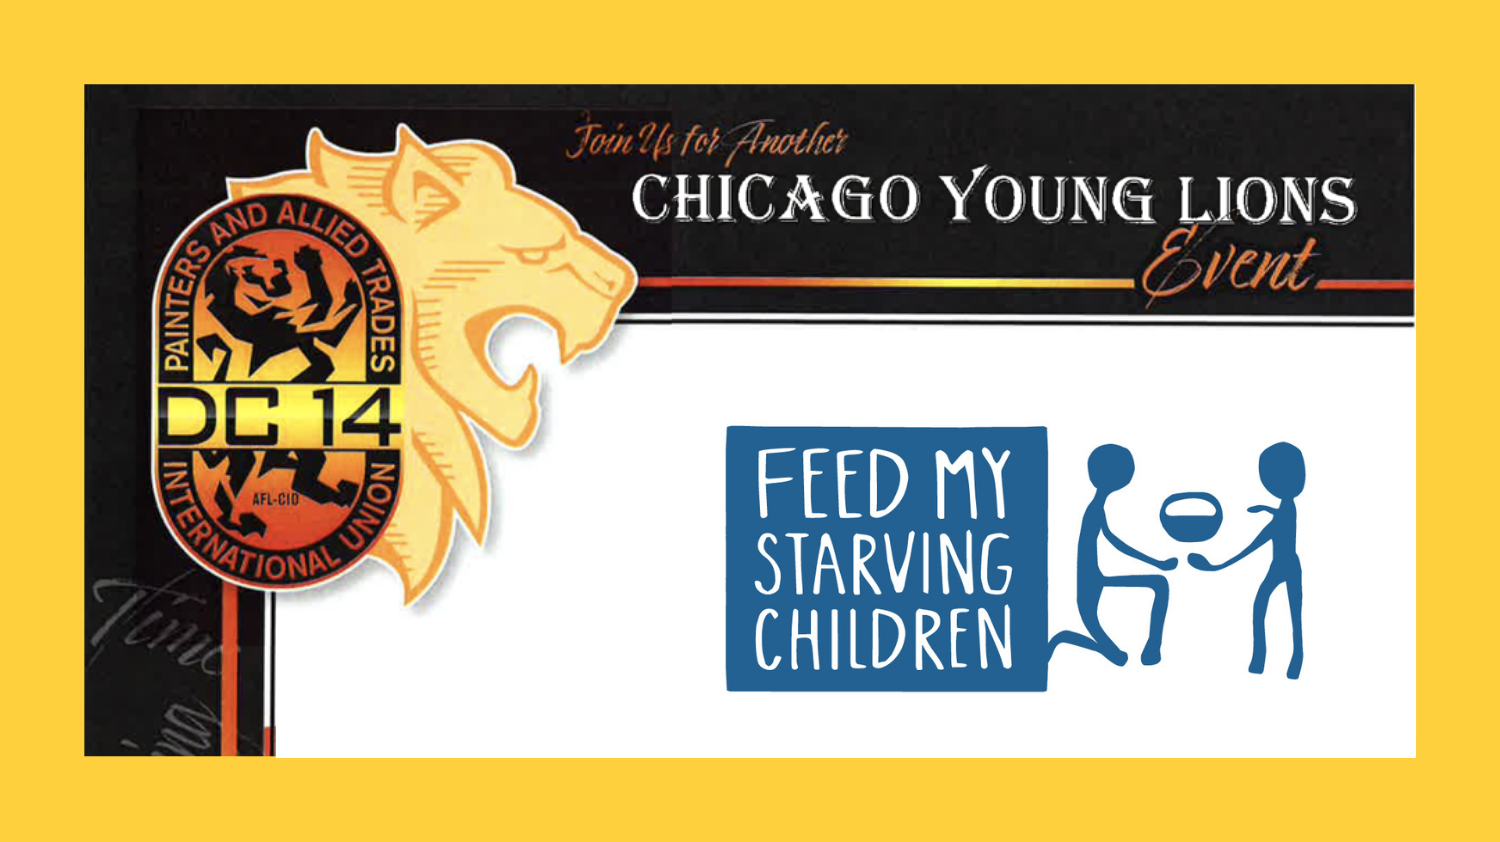 Chicago Young Lions Event - Feed My Starving Children